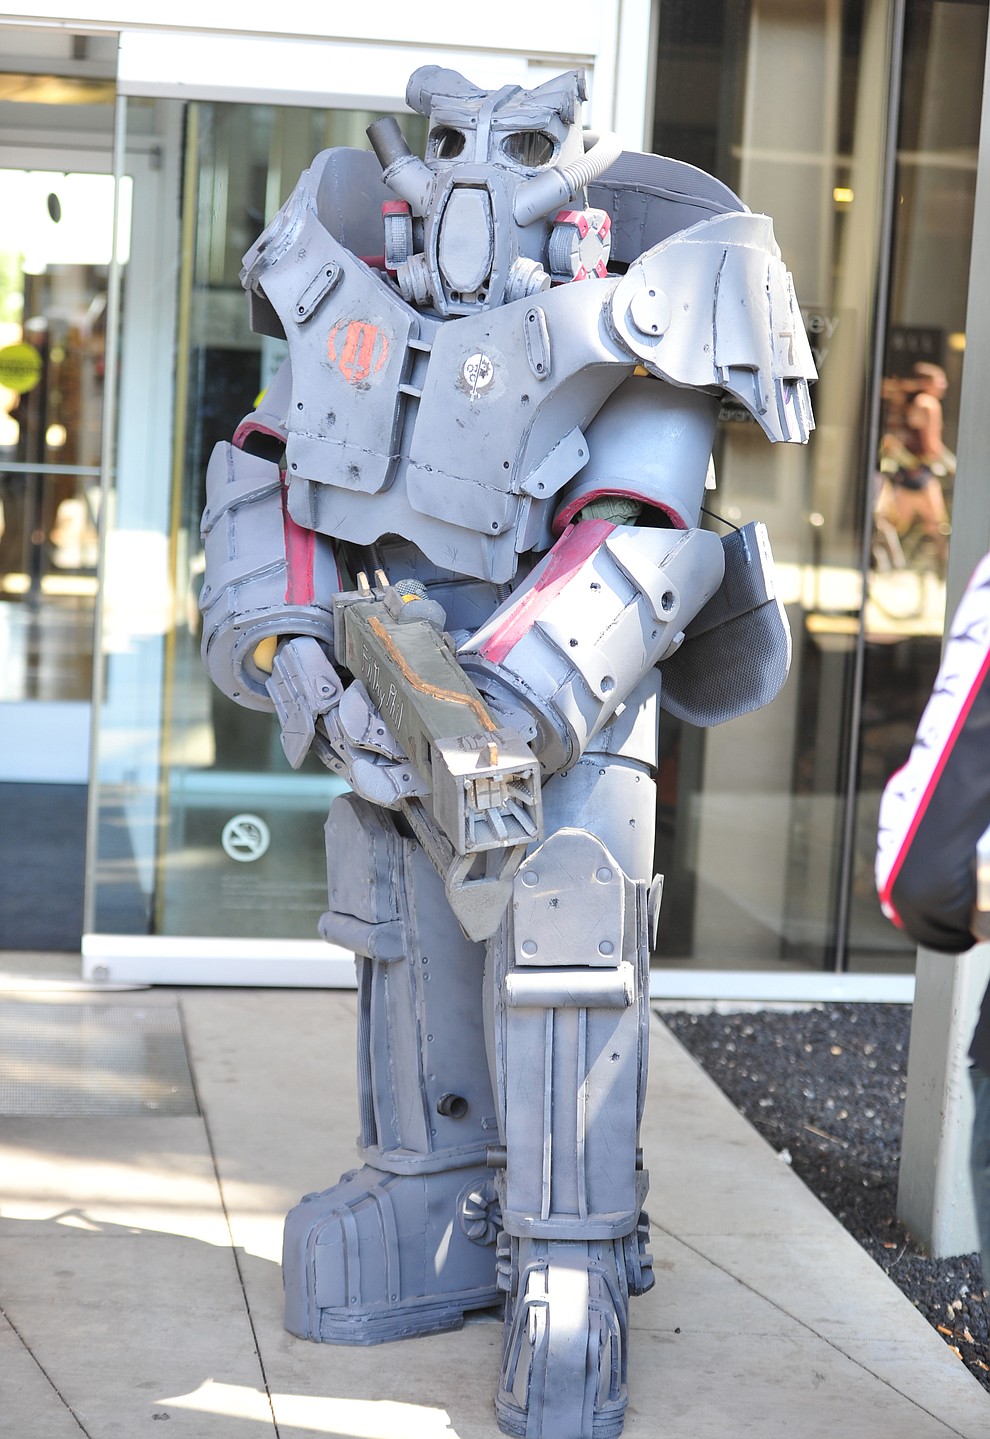 X-01 Powerarmor from Fallout 4 at the Fandomania Comic Con event Saturday, July 28, 2018 in and around the Prescott Valley Library. (Les Stukenberg/Courier)